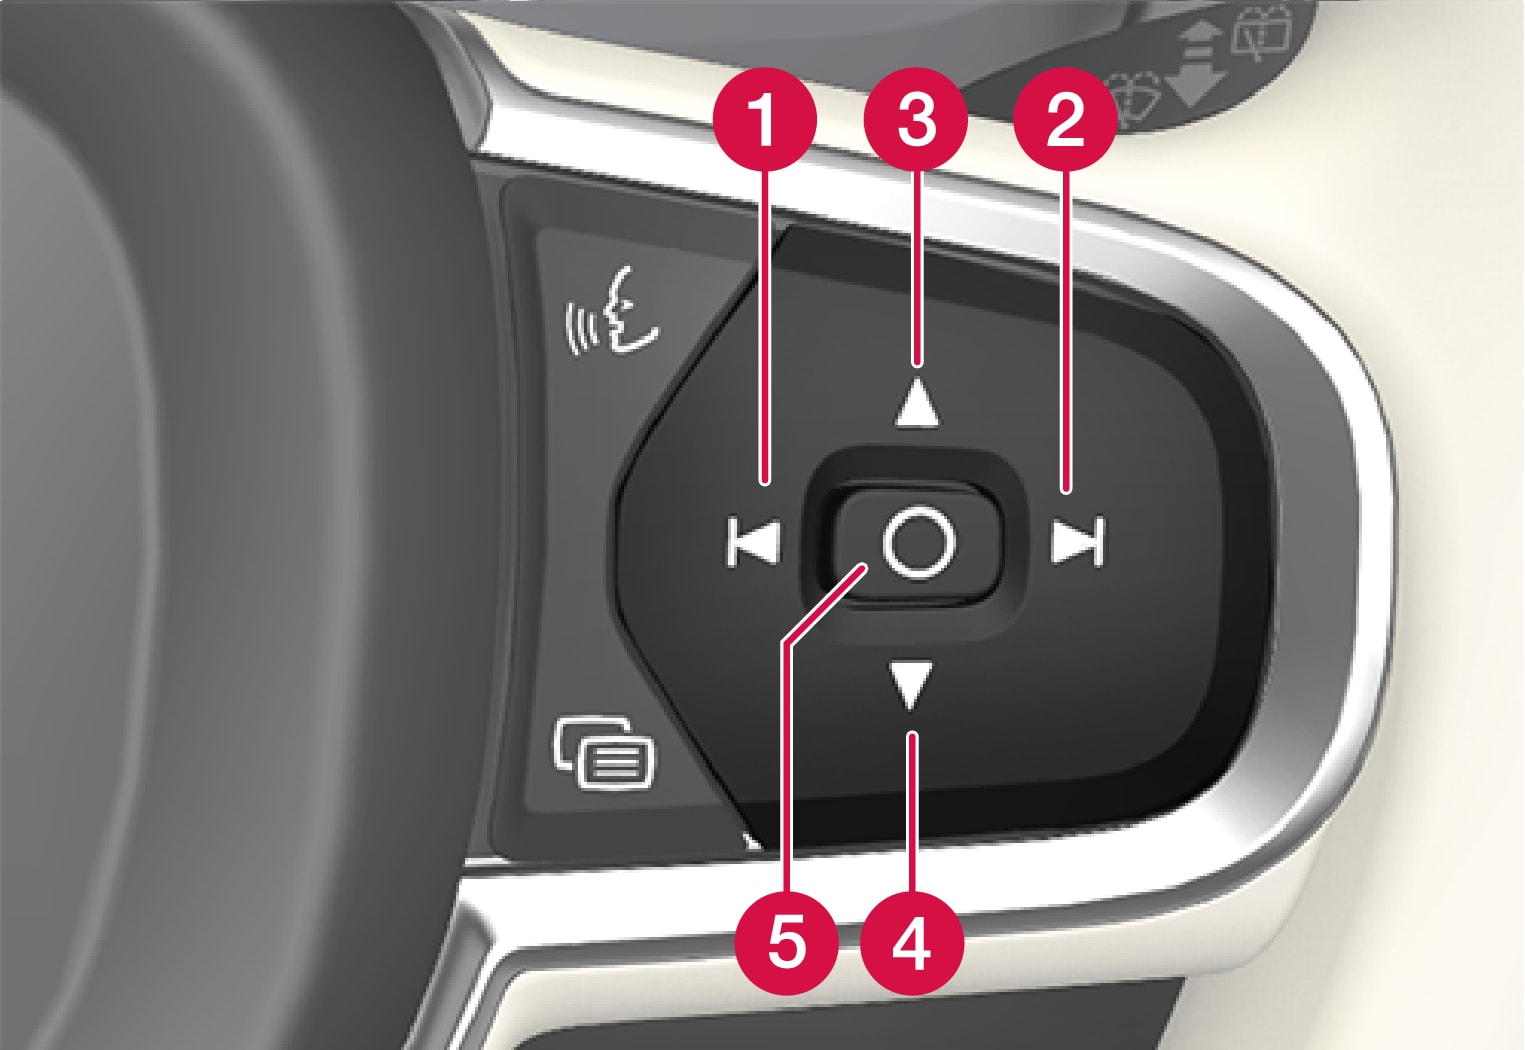 P5 Right steering wheel buttons, HUD